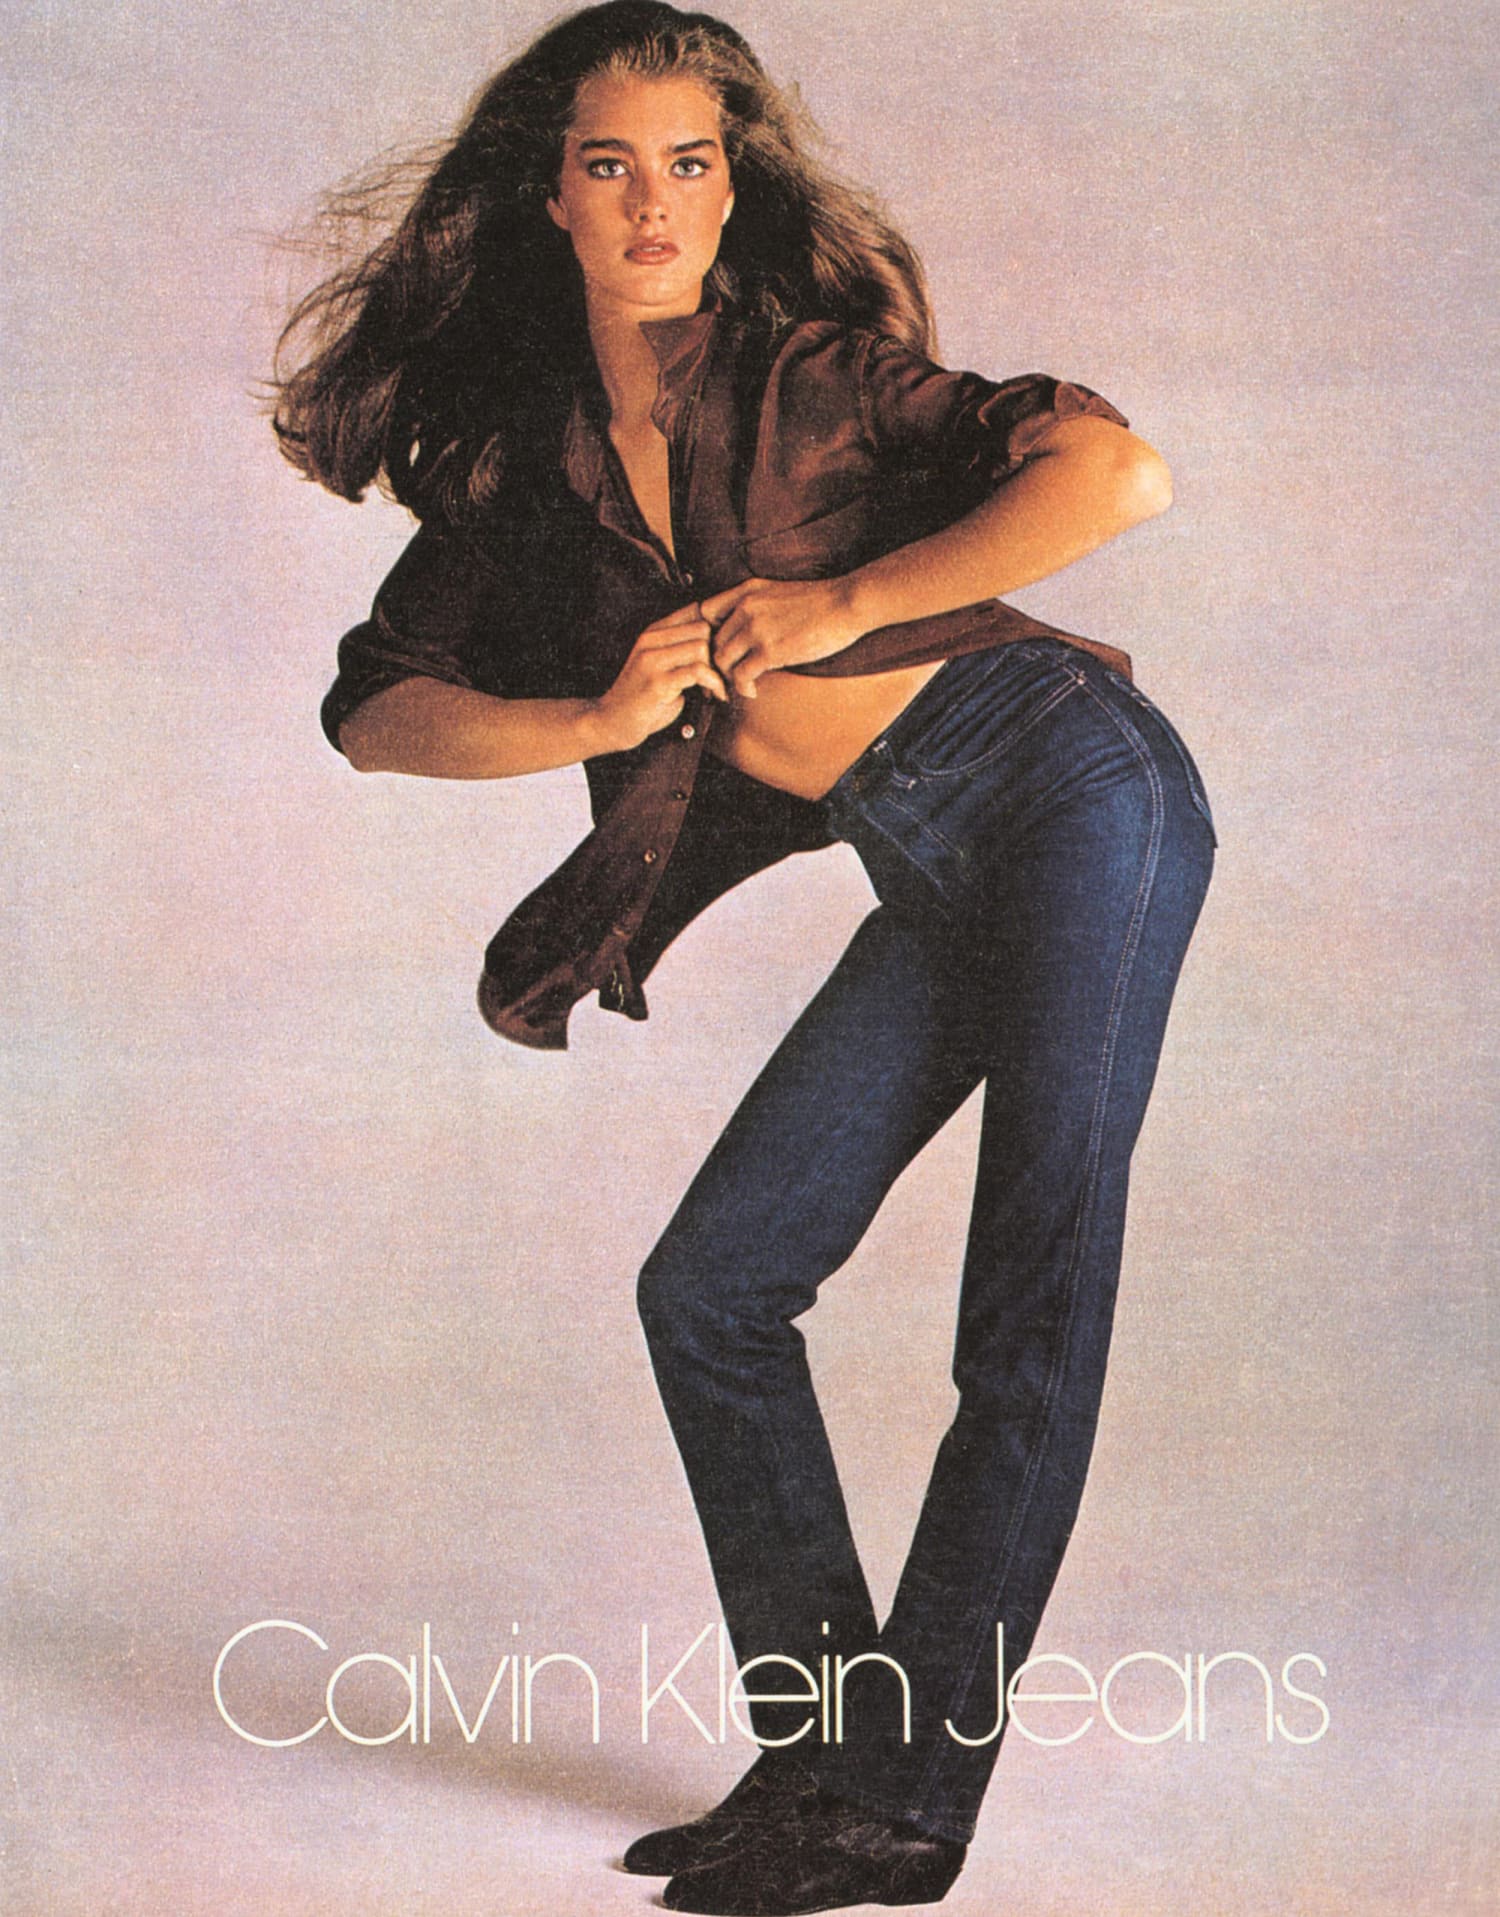 Banzai melk wit wees onder de indruk Brooke Shields Poses In Jordache Jeans 40 Years After Calvin Klein Campaign